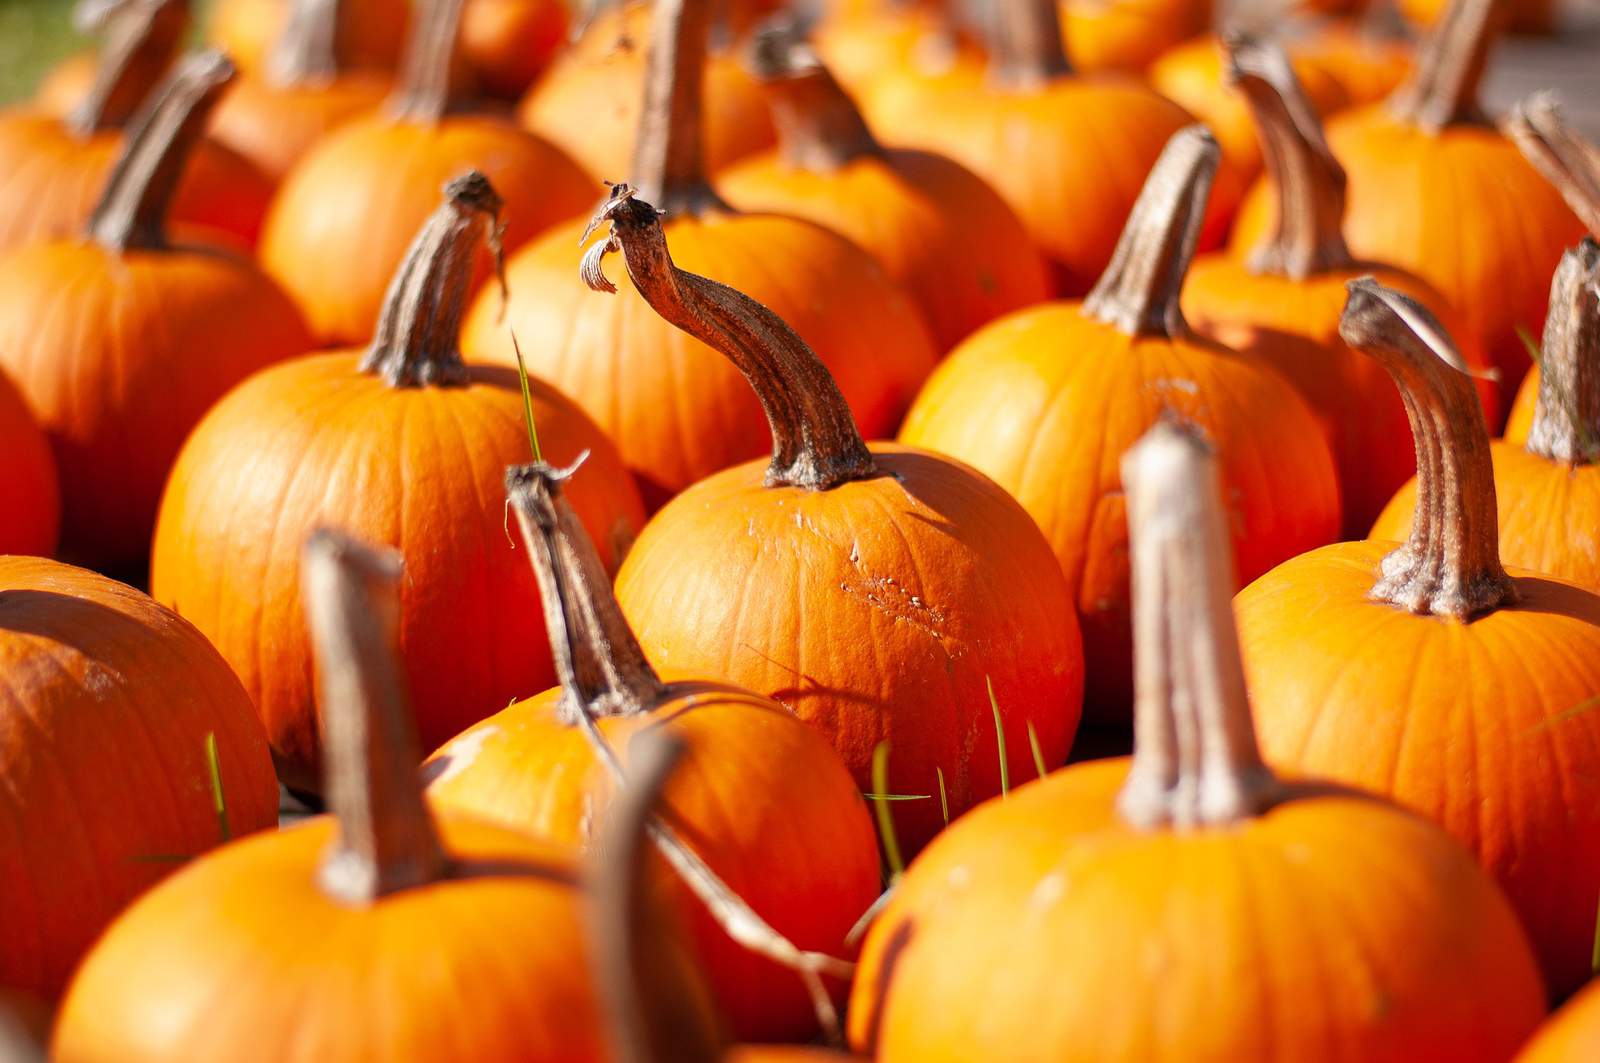 Meet the Texas town that became the pumpkin capital of the U.S.A.